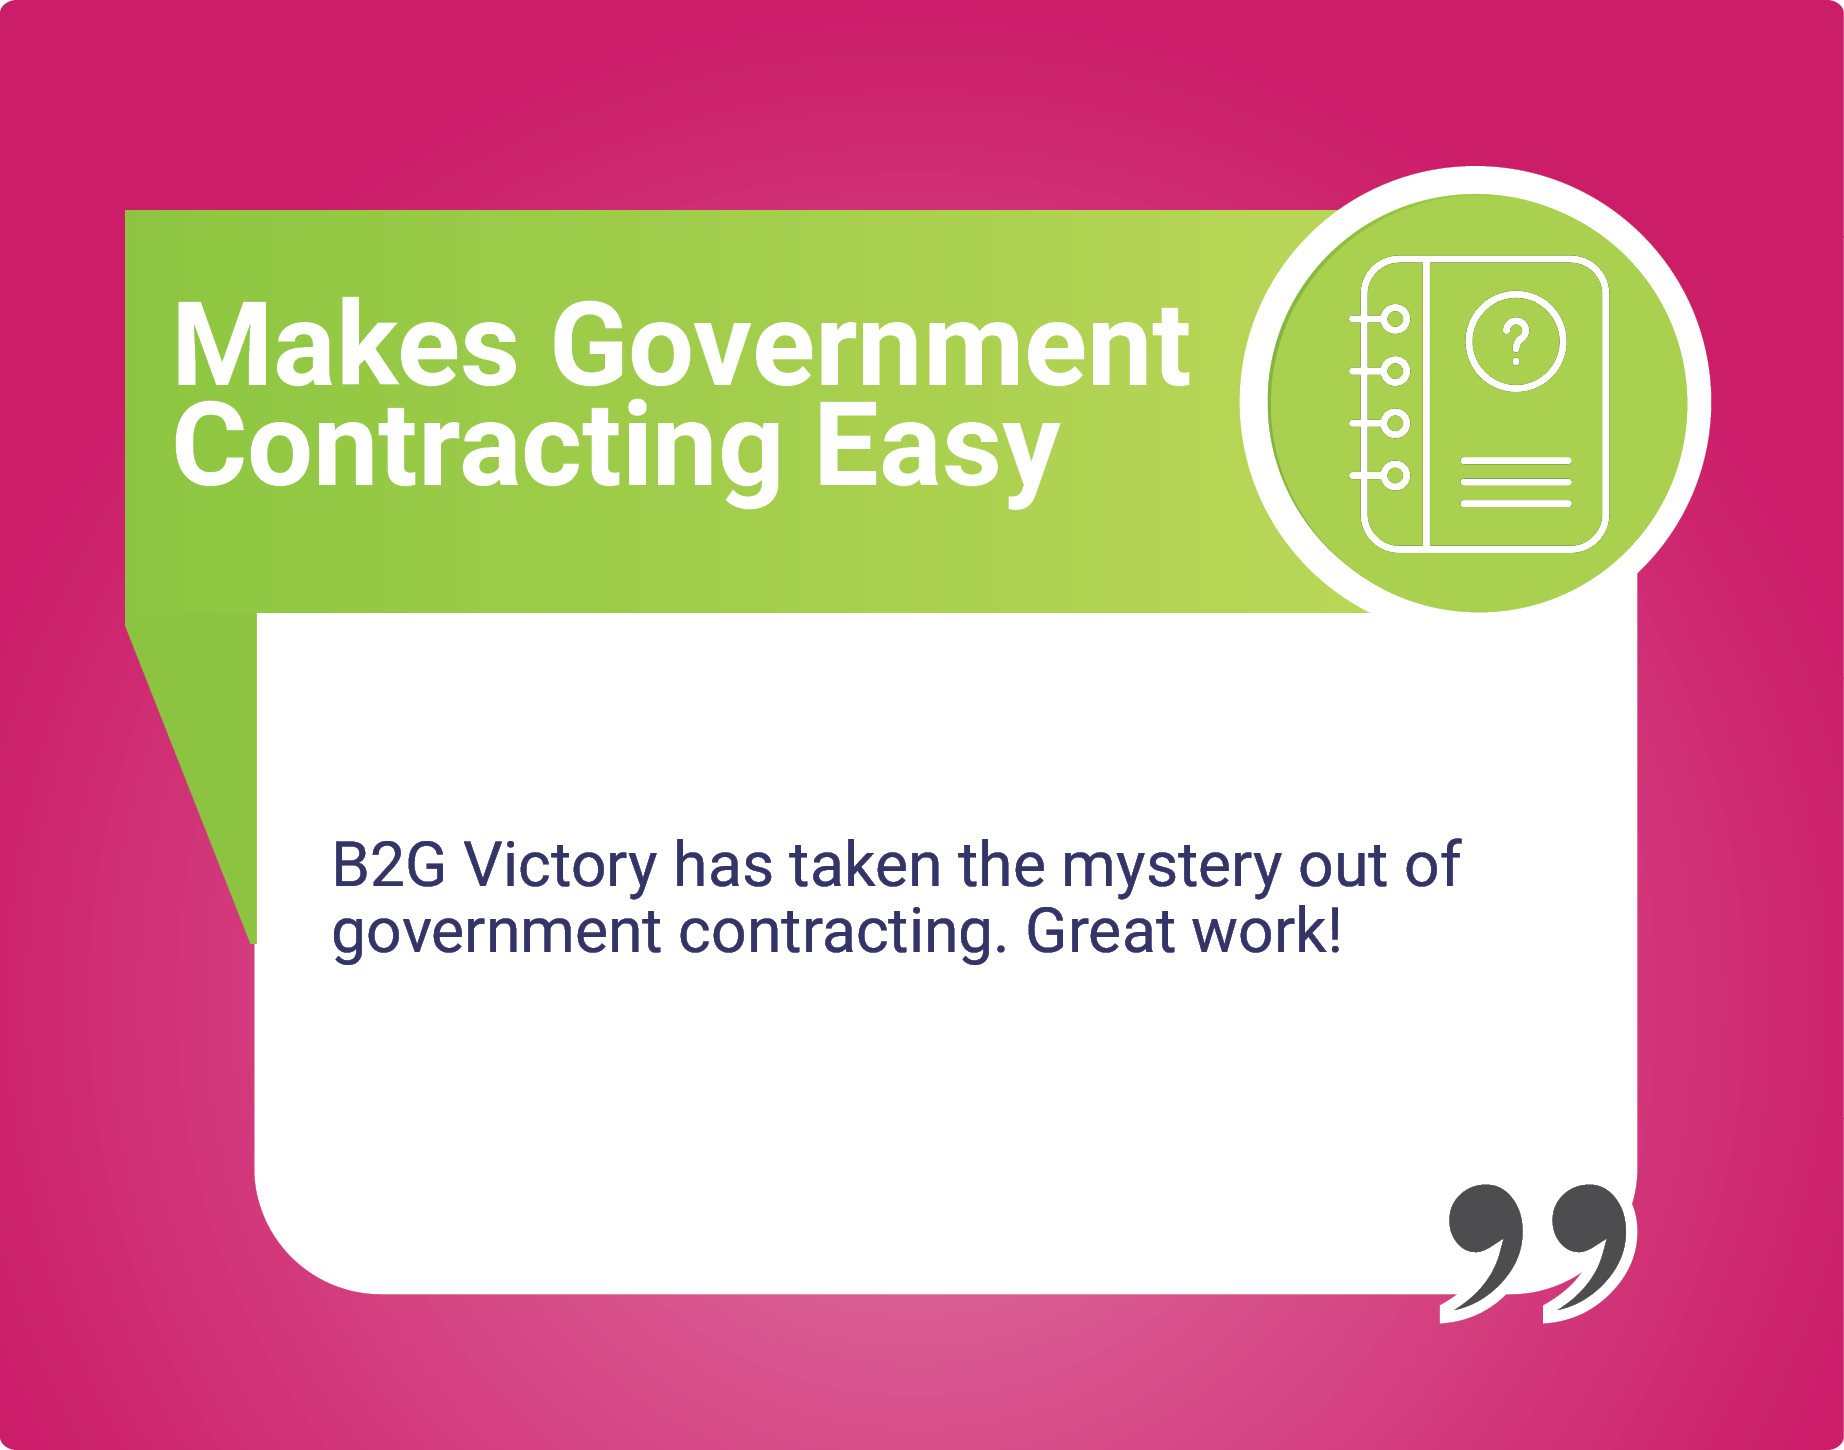 Testimonial for B2G Victory Portal about making government contracting easy for small businesses